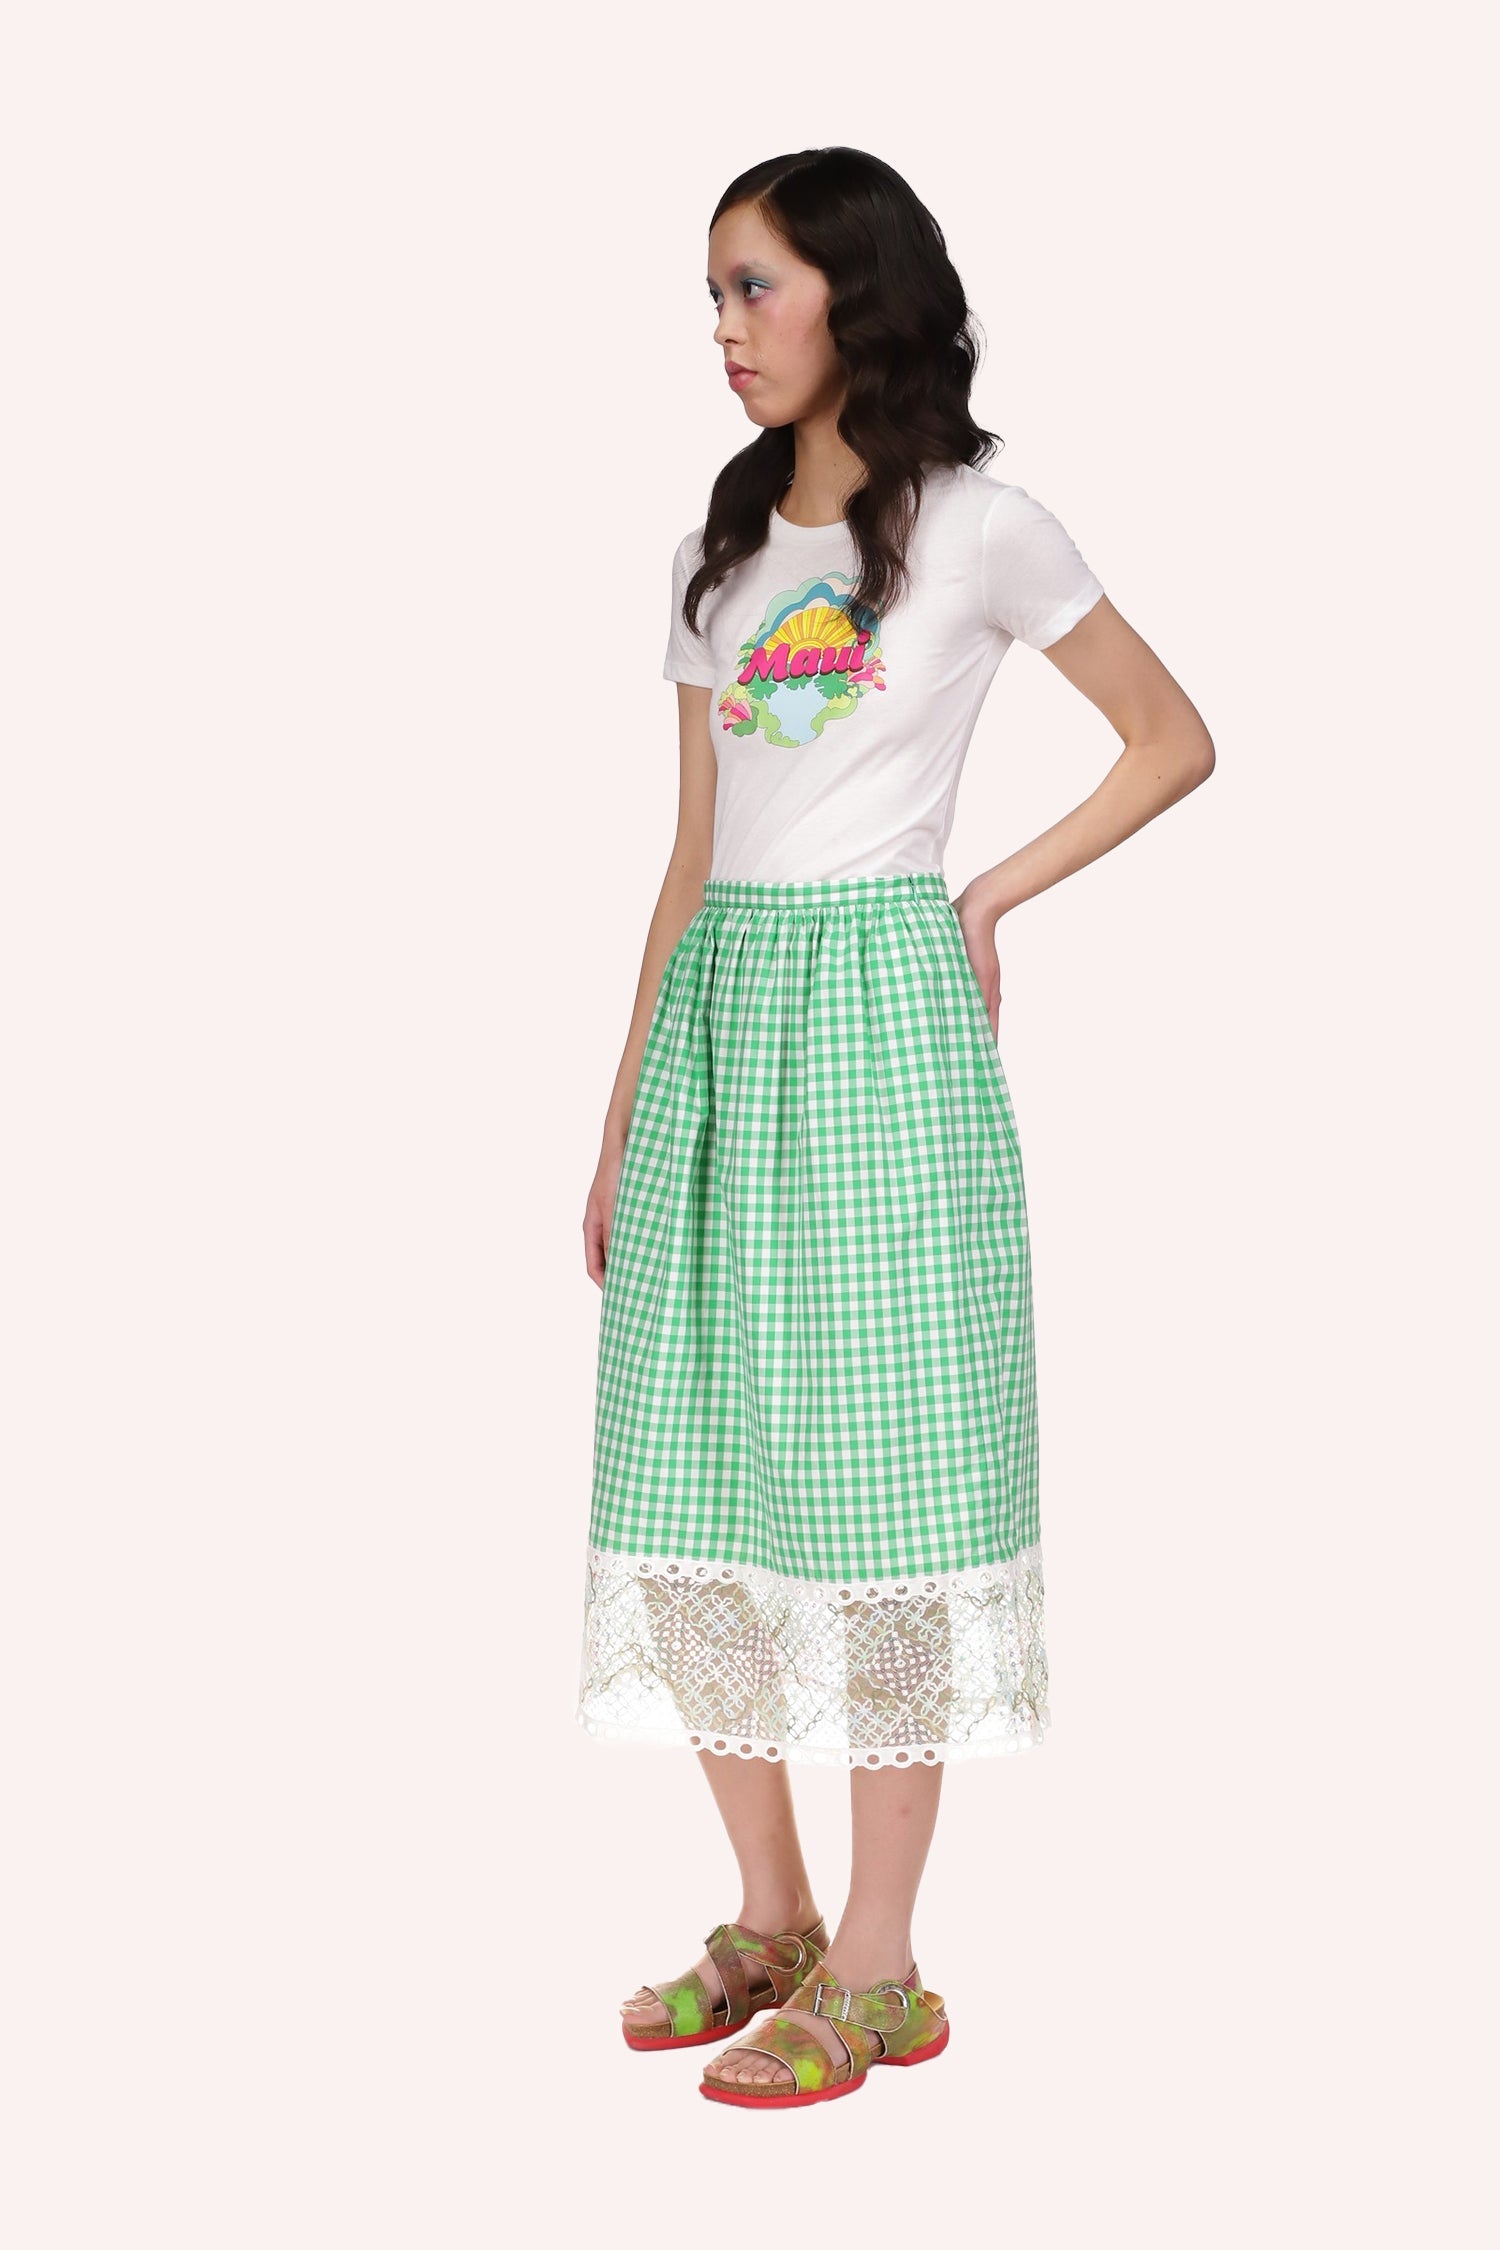 Gingham Skirt white and green, mid-calf long, large see-thru lace at bottom.